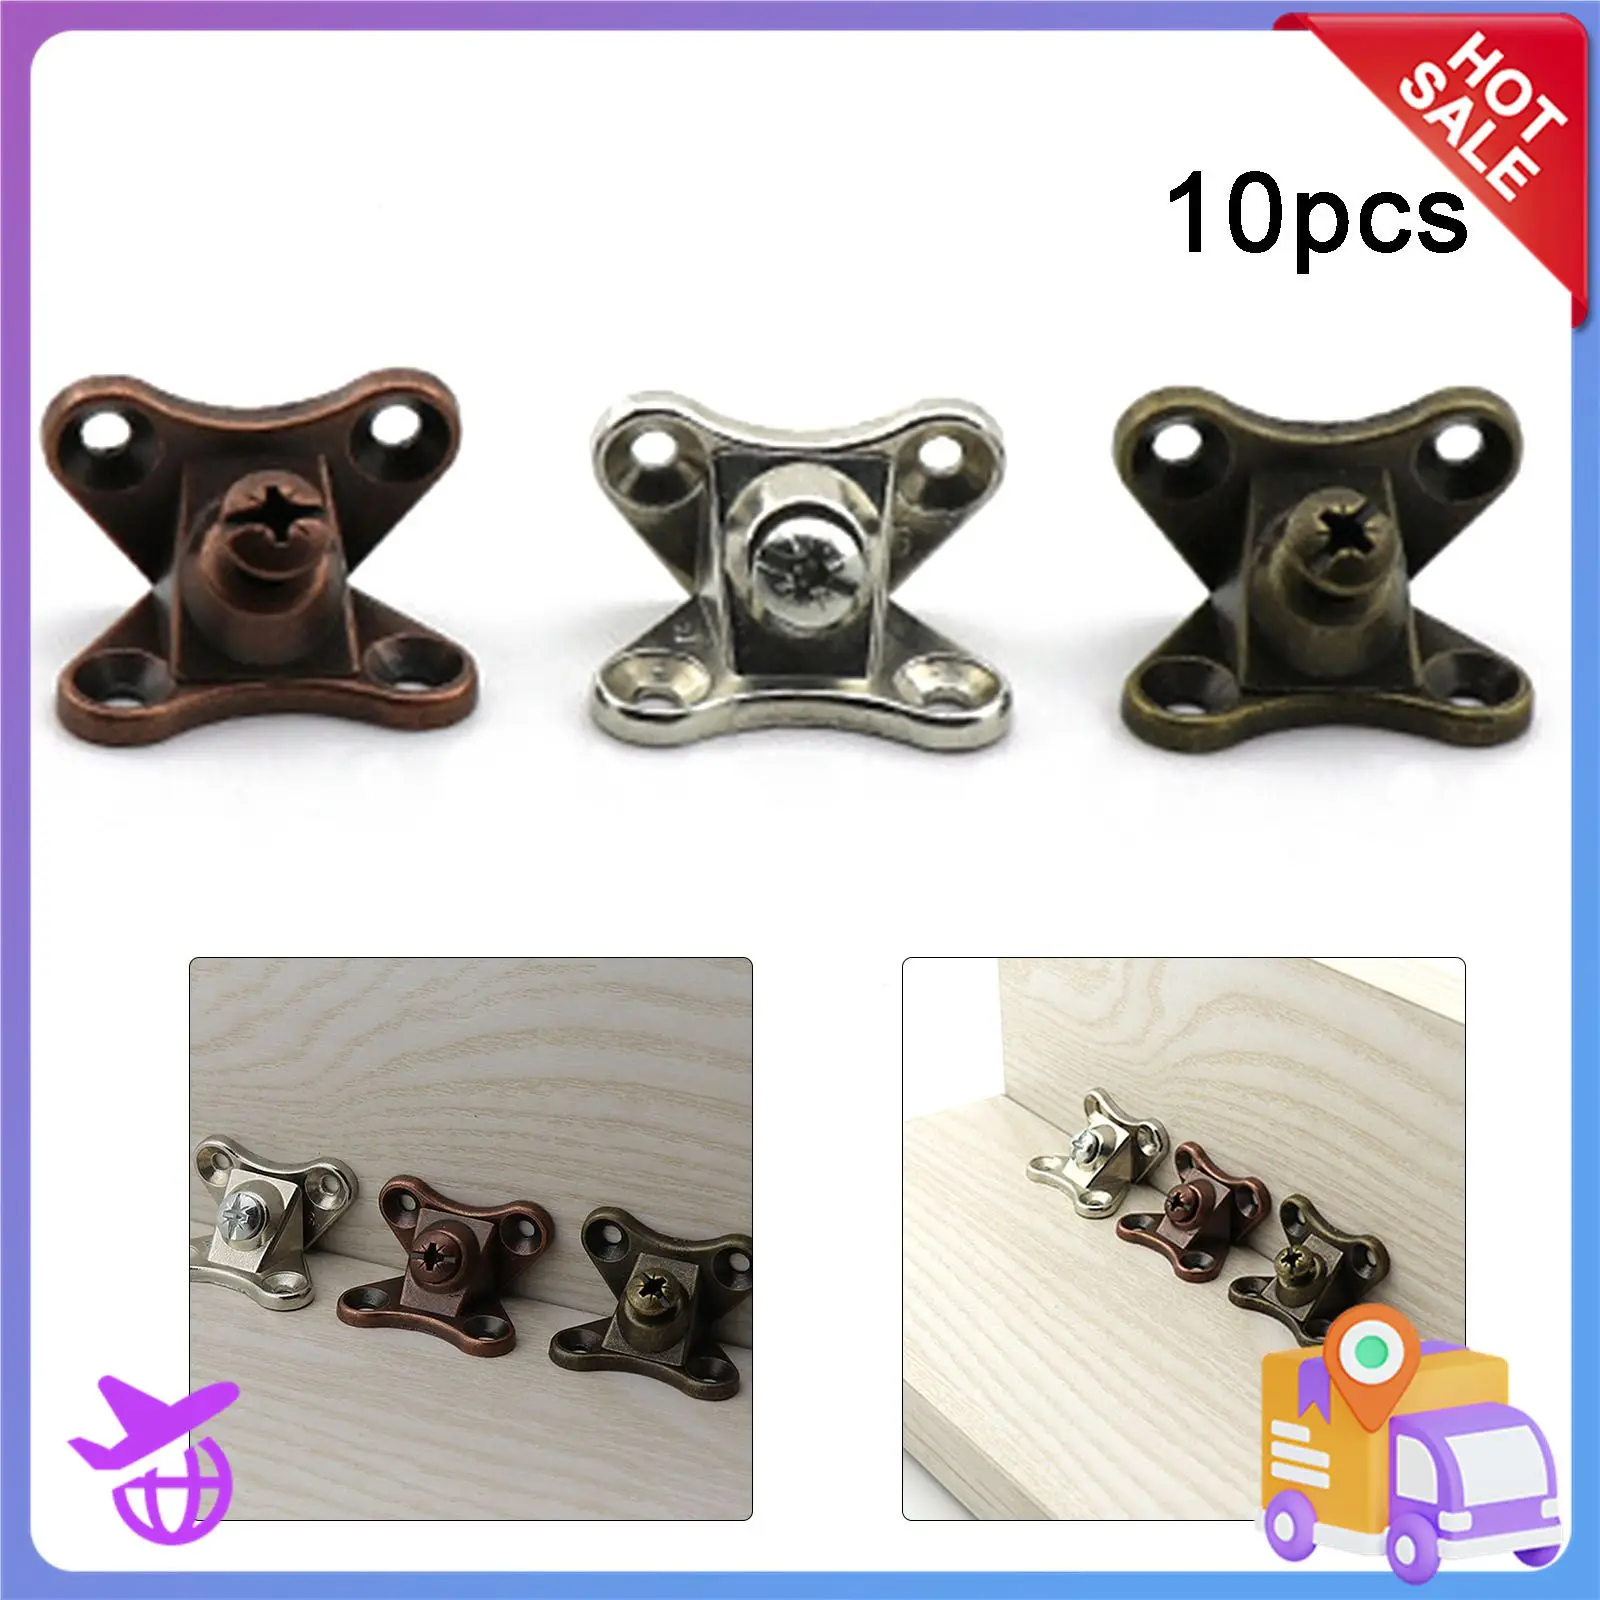 

10pcs Removable Zinc Alloy Butterfly Angle Code Partition Right Angle Bracket Angle Code Connectors No Hole 3 In 1 Connectors